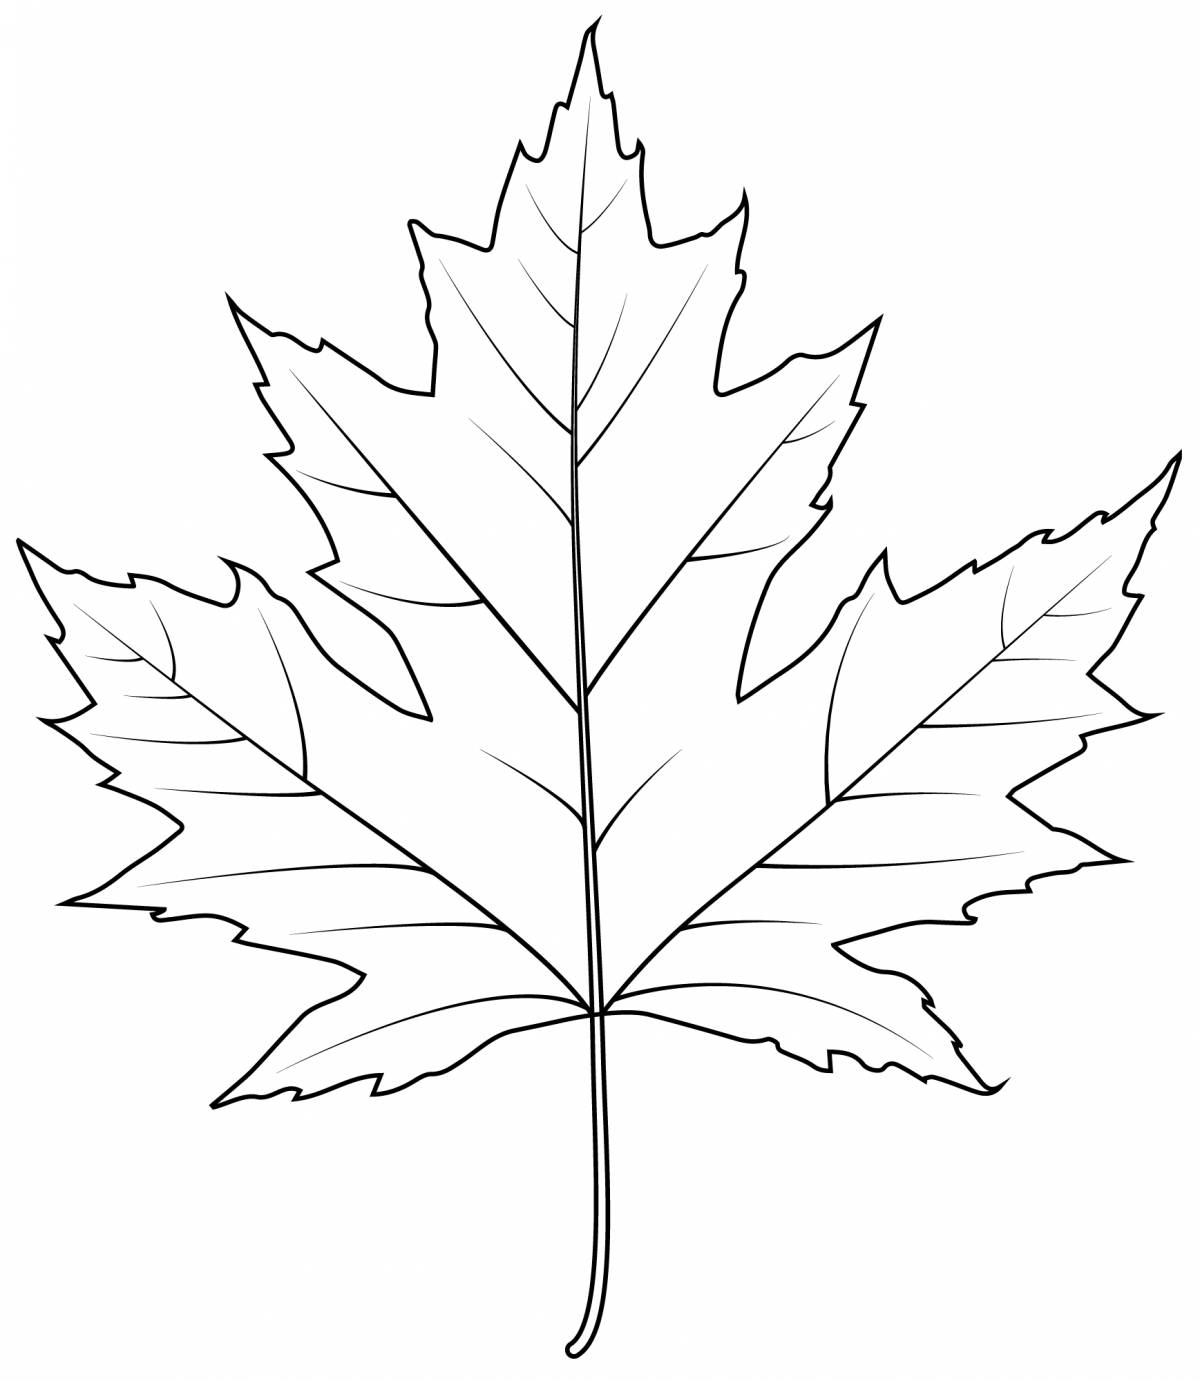 Exciting maple leaf coloring book for kids